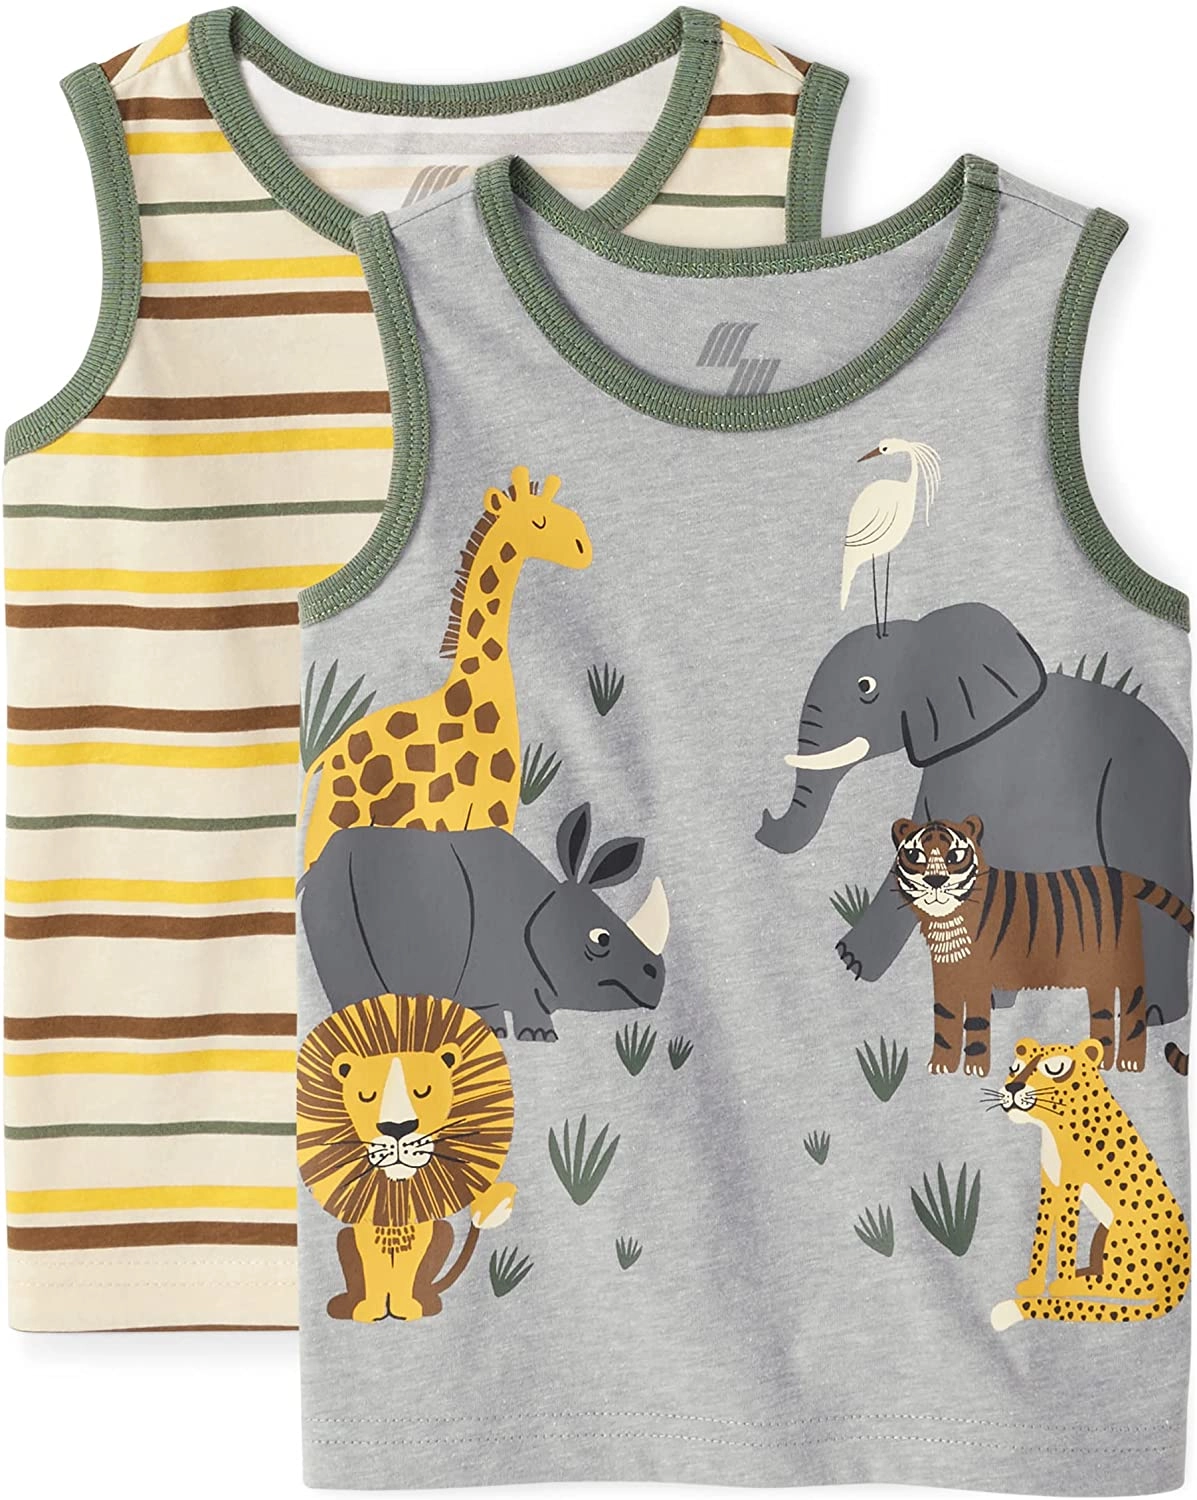 Toddler Graphic Tank Tops From Bangladesh Children Clothing Suppliers